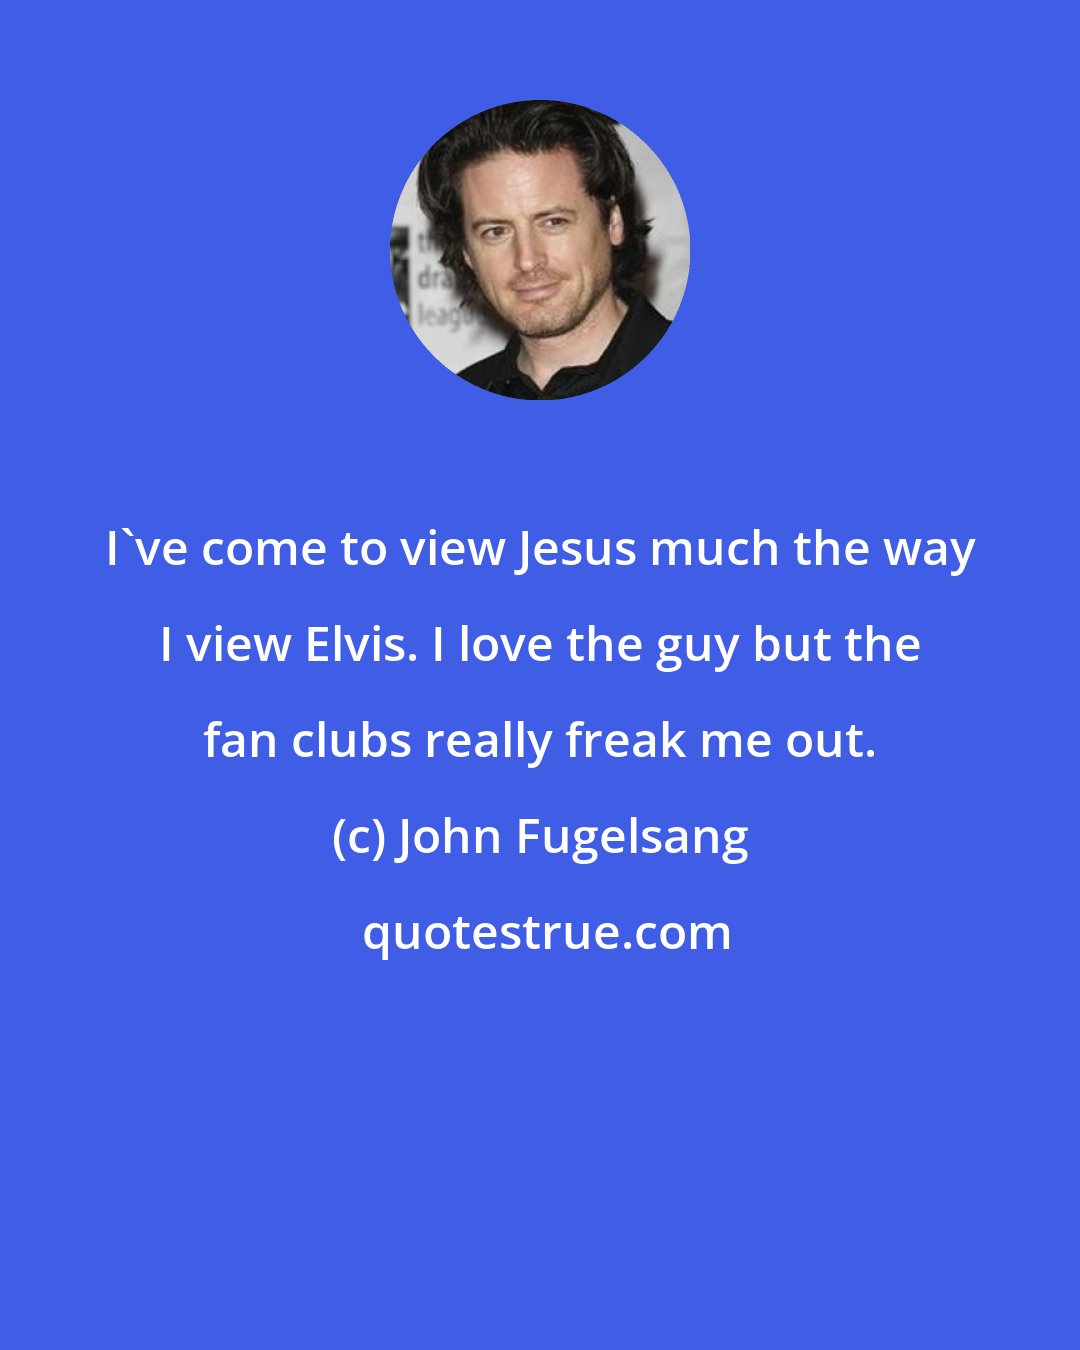 John Fugelsang: I've come to view Jesus much the way I view Elvis. I love the guy but the fan clubs really freak me out.